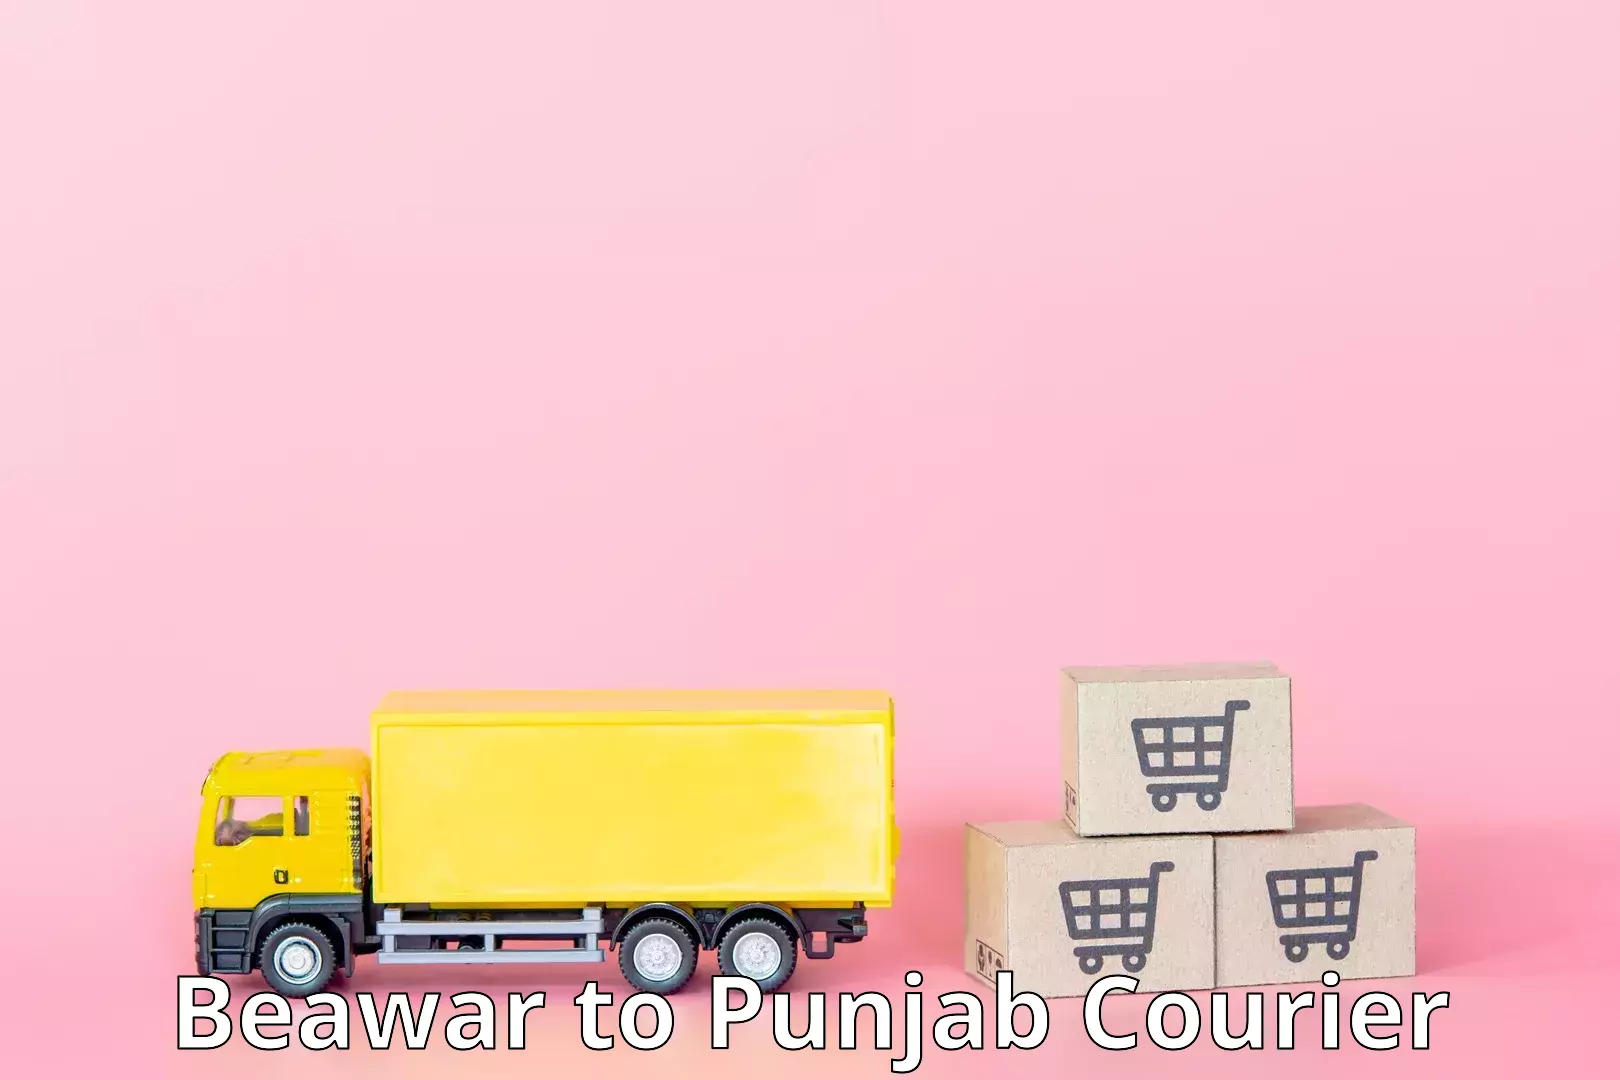 Round-the-clock parcel delivery Beawar to Abohar